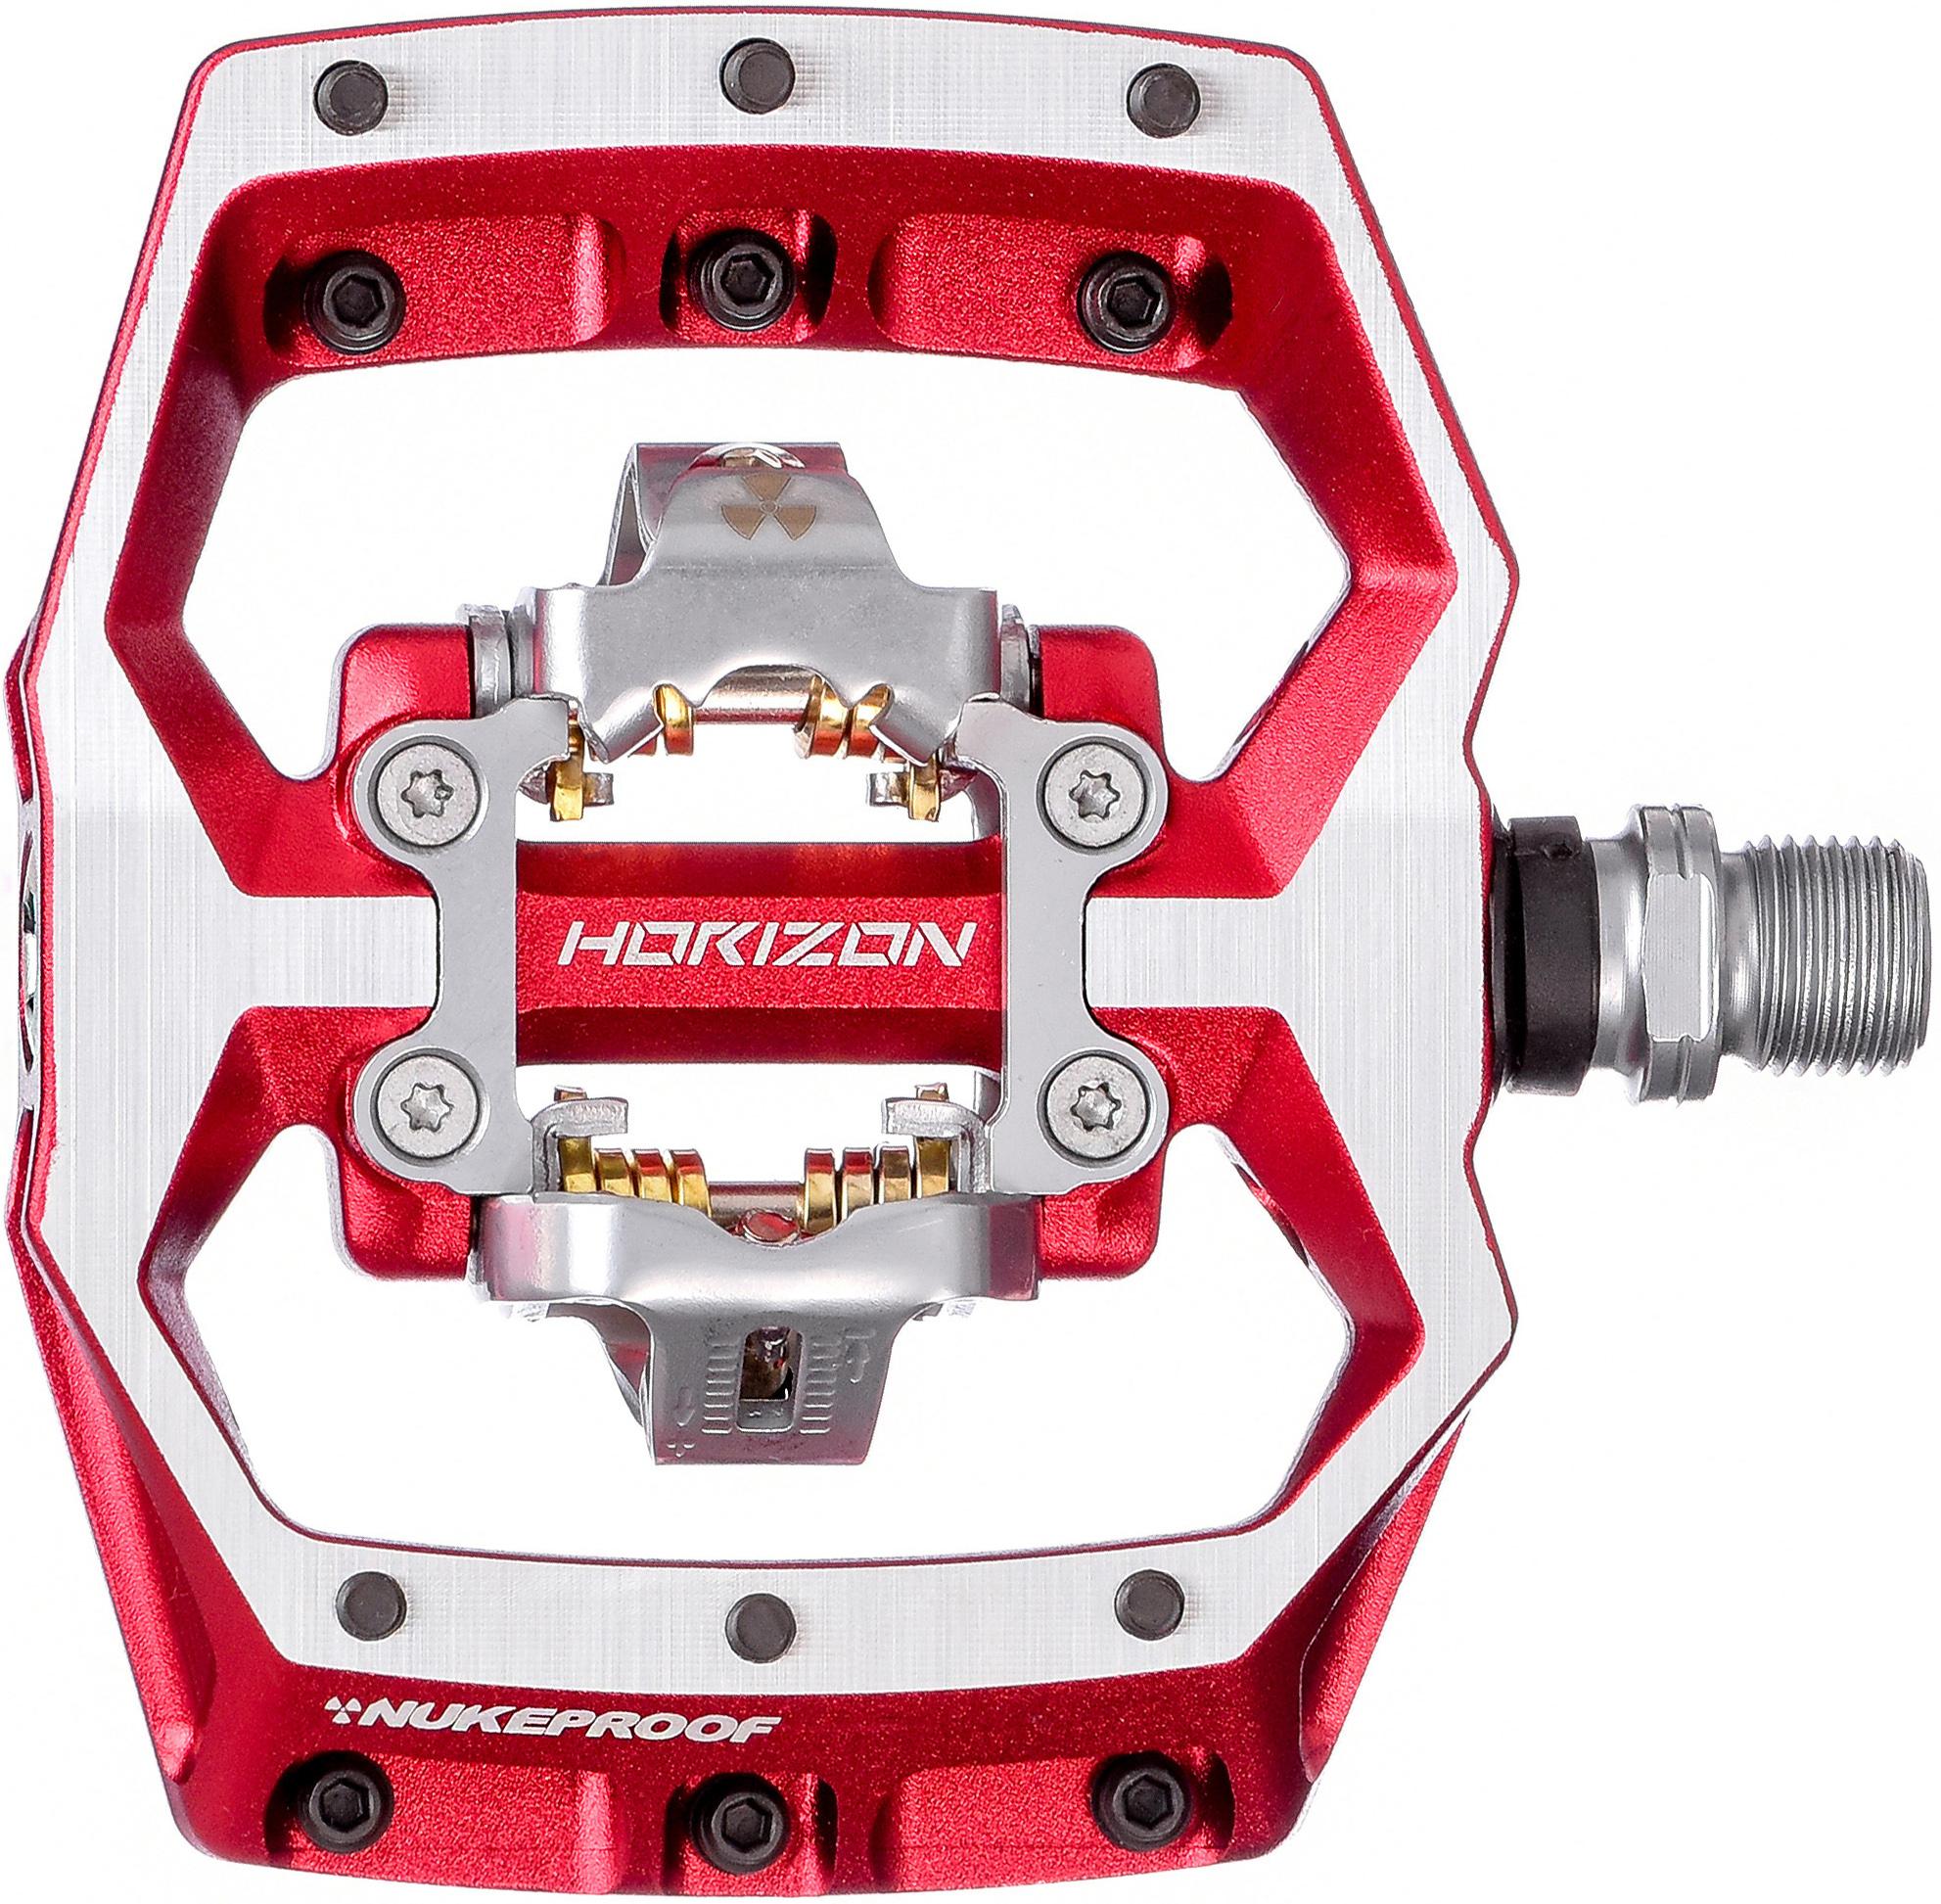 Nukeproof Horizon Cl Crmo Downhill Pedals - Red